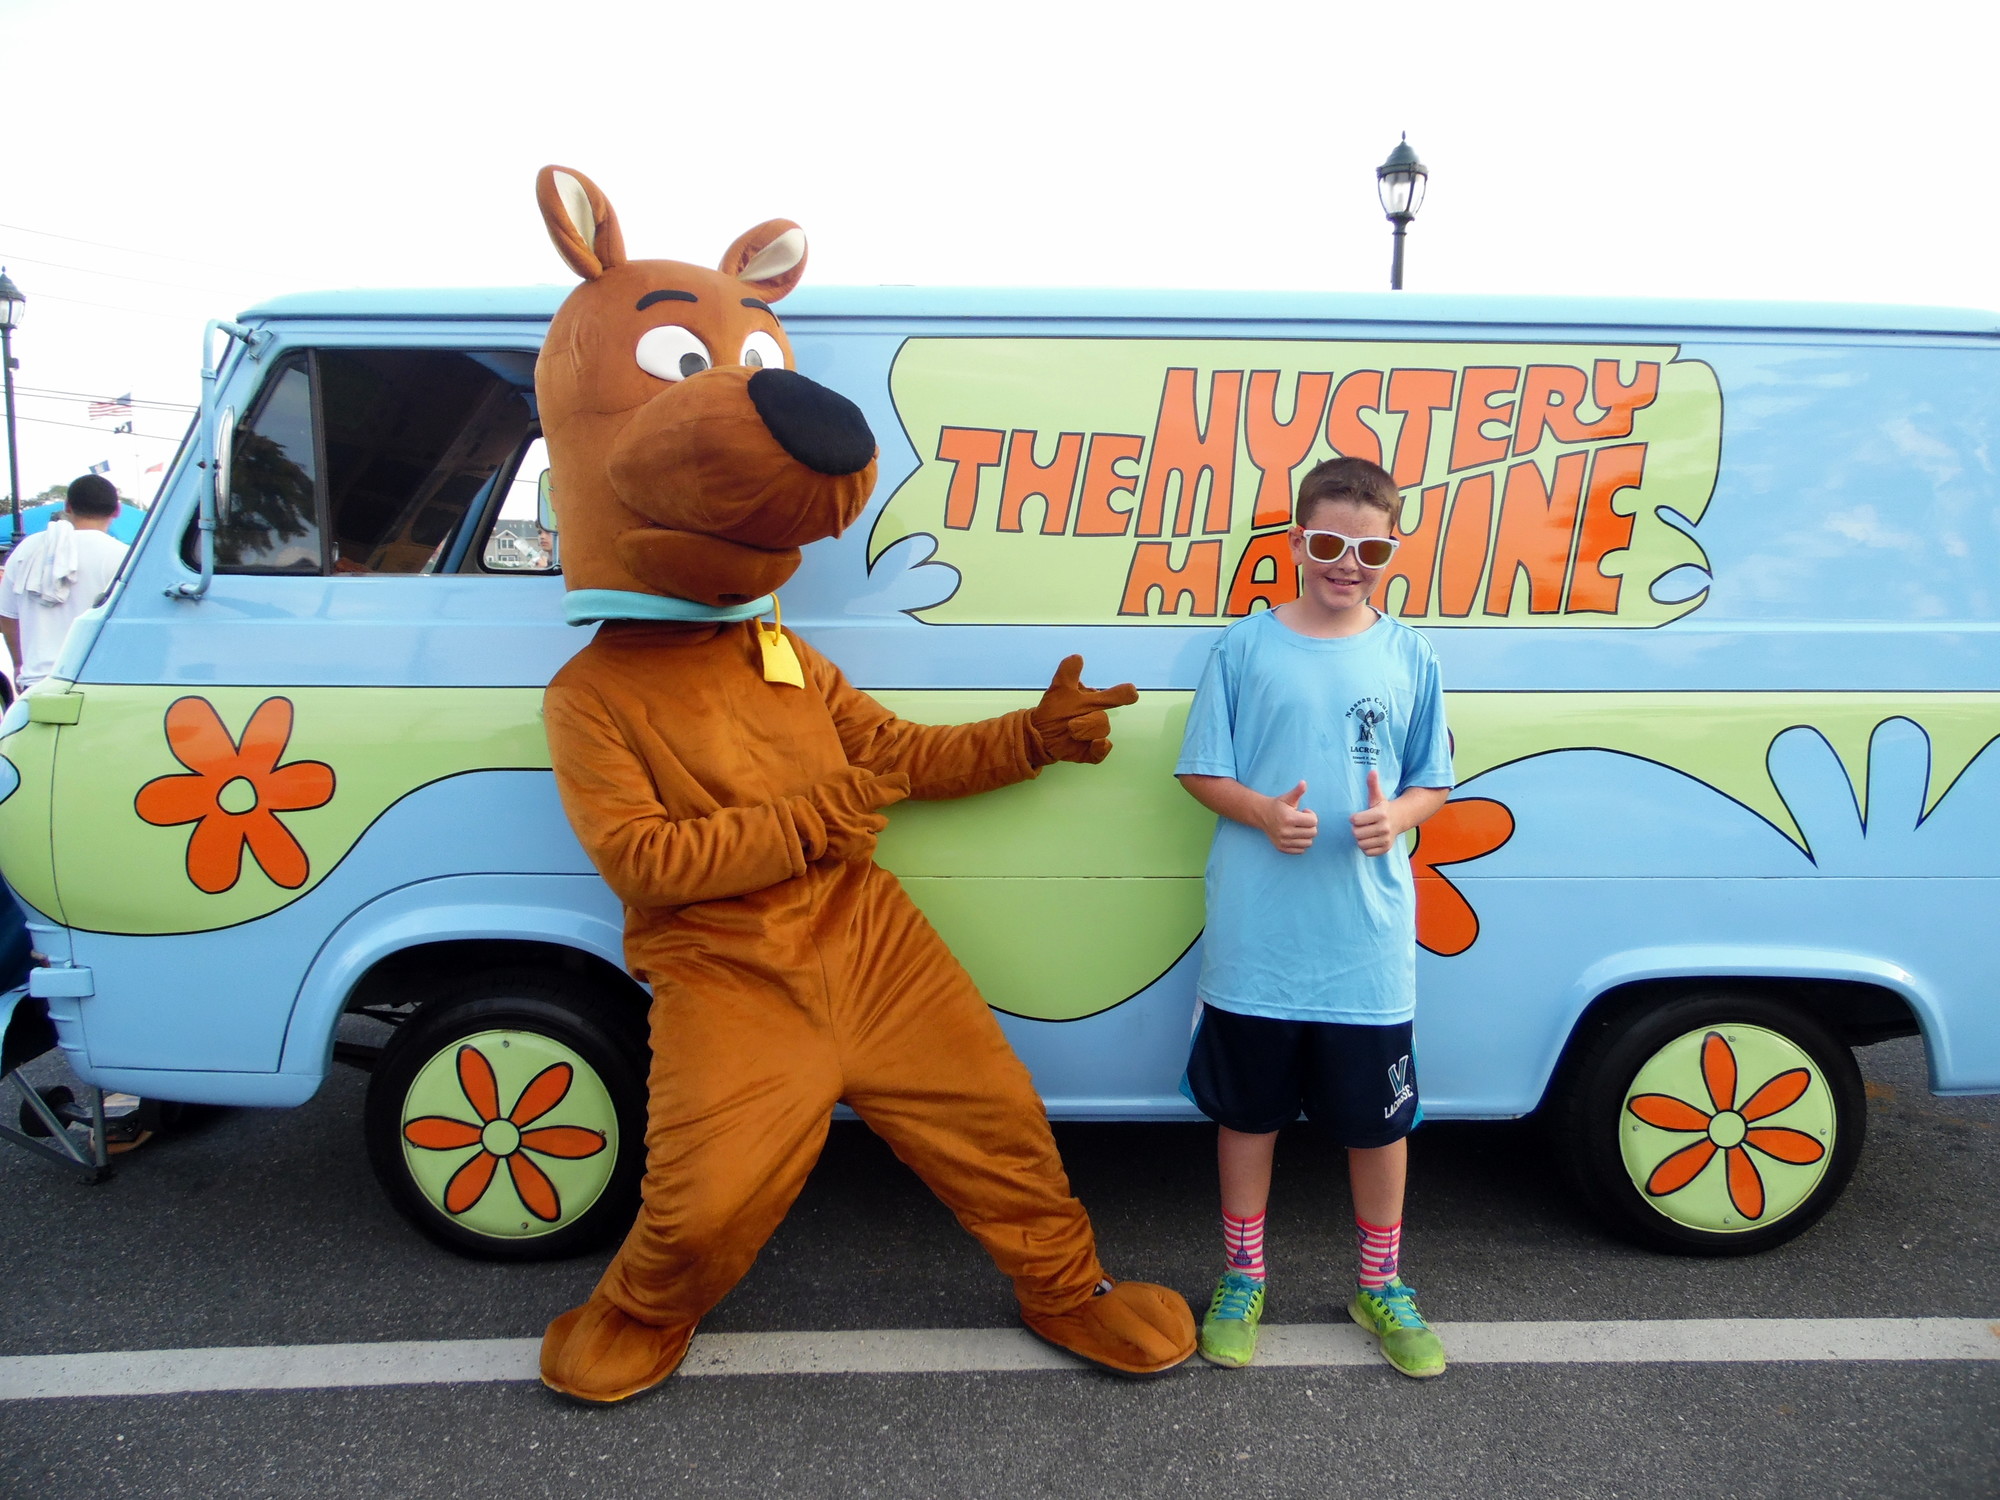 Colin Grace, 11, met Scooby Doo and his Mystery Machine at the East Rockaway Car Show Monday night. The event was a fundraiser for the school district’s education foundation.